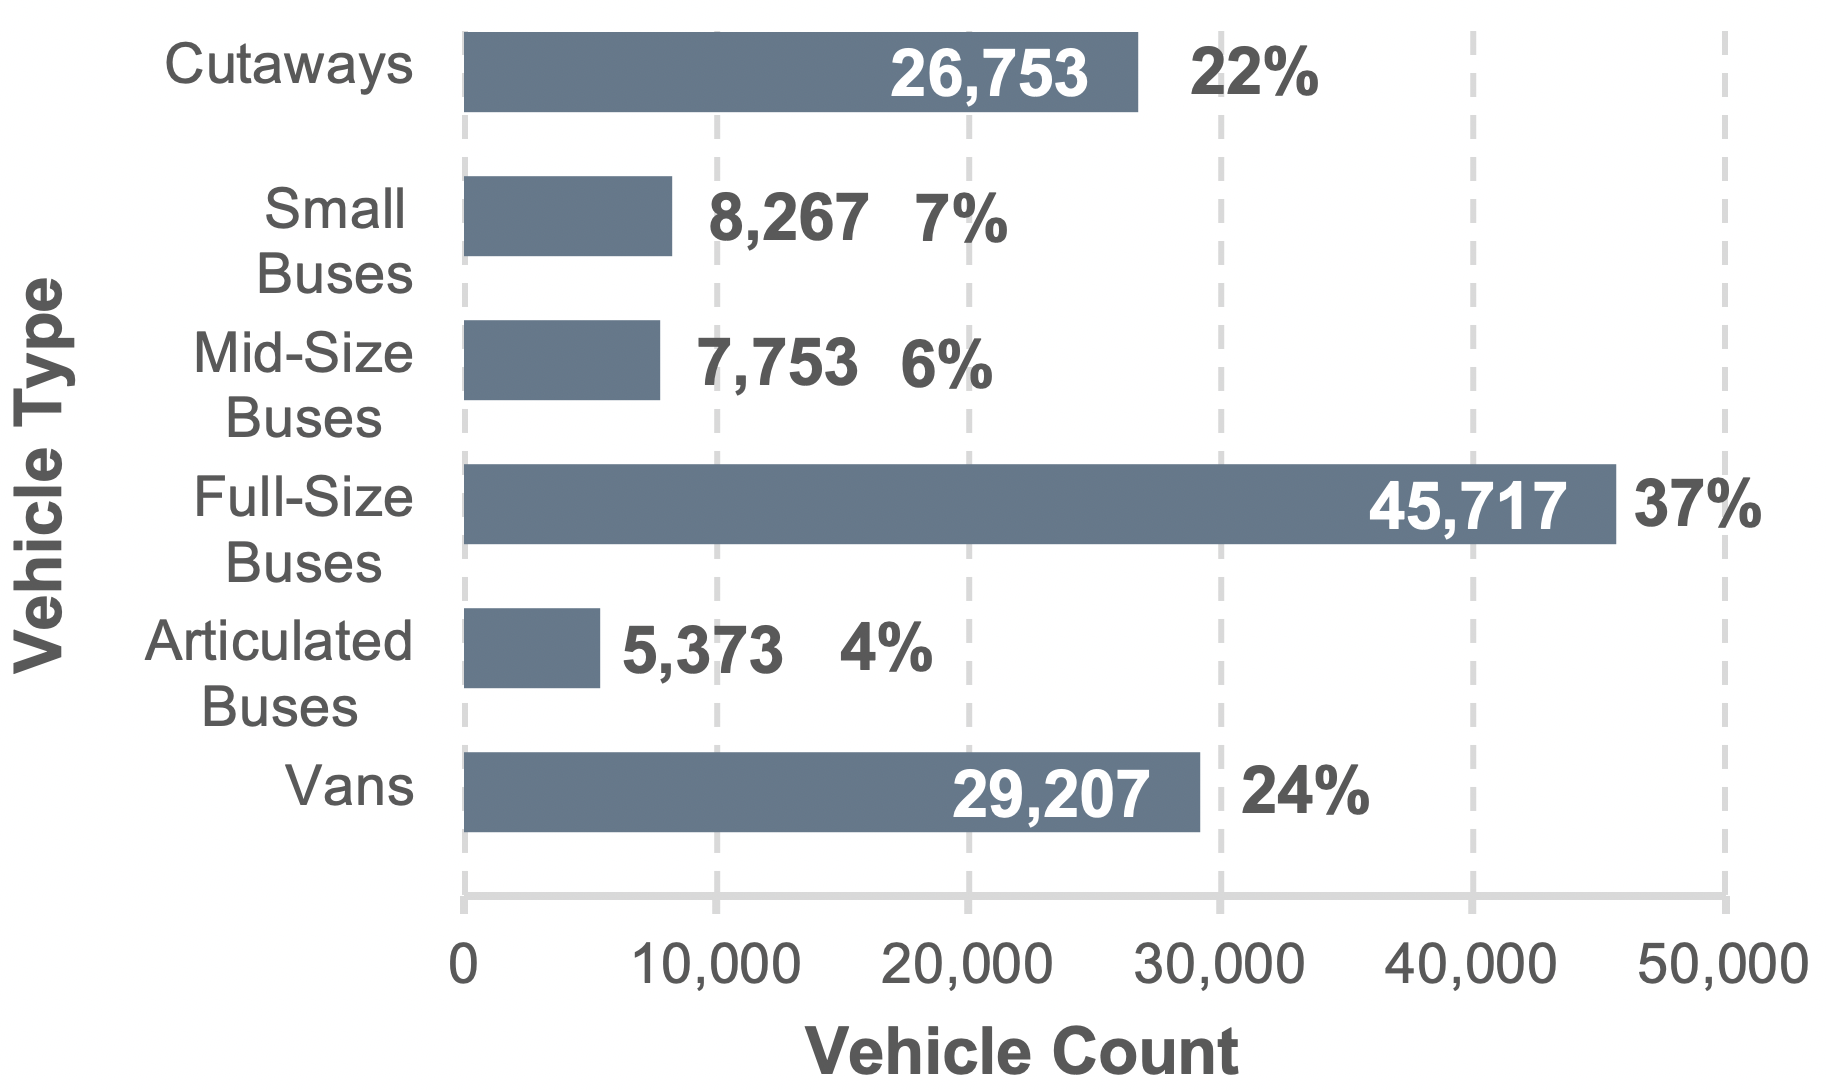 A bar chart shows distribution of urban transit fleet across five vehicle categories.  The vans category  has 29,207 vehicles and accounts for 23.7 percent of the fleet.  The articulated buses category has 5,373 vehicles and accounts for 4.4 percent of the fleet.  The full-size buses category has 45,717 vehicles and accounts for 37.1 percent of the fleet.  The mid-size bus category has 7,753 vehicles and accounts for 6.3 percent of the fleet.  The small bus category has 8,267 vehicles and accounts for 6.7 percent of the fleet.  The cutaways category has 26,753 vehicles and accounts for 21.7 percent of the fleet.  Source: Transit Economic Requirements Model and National Transit Database.